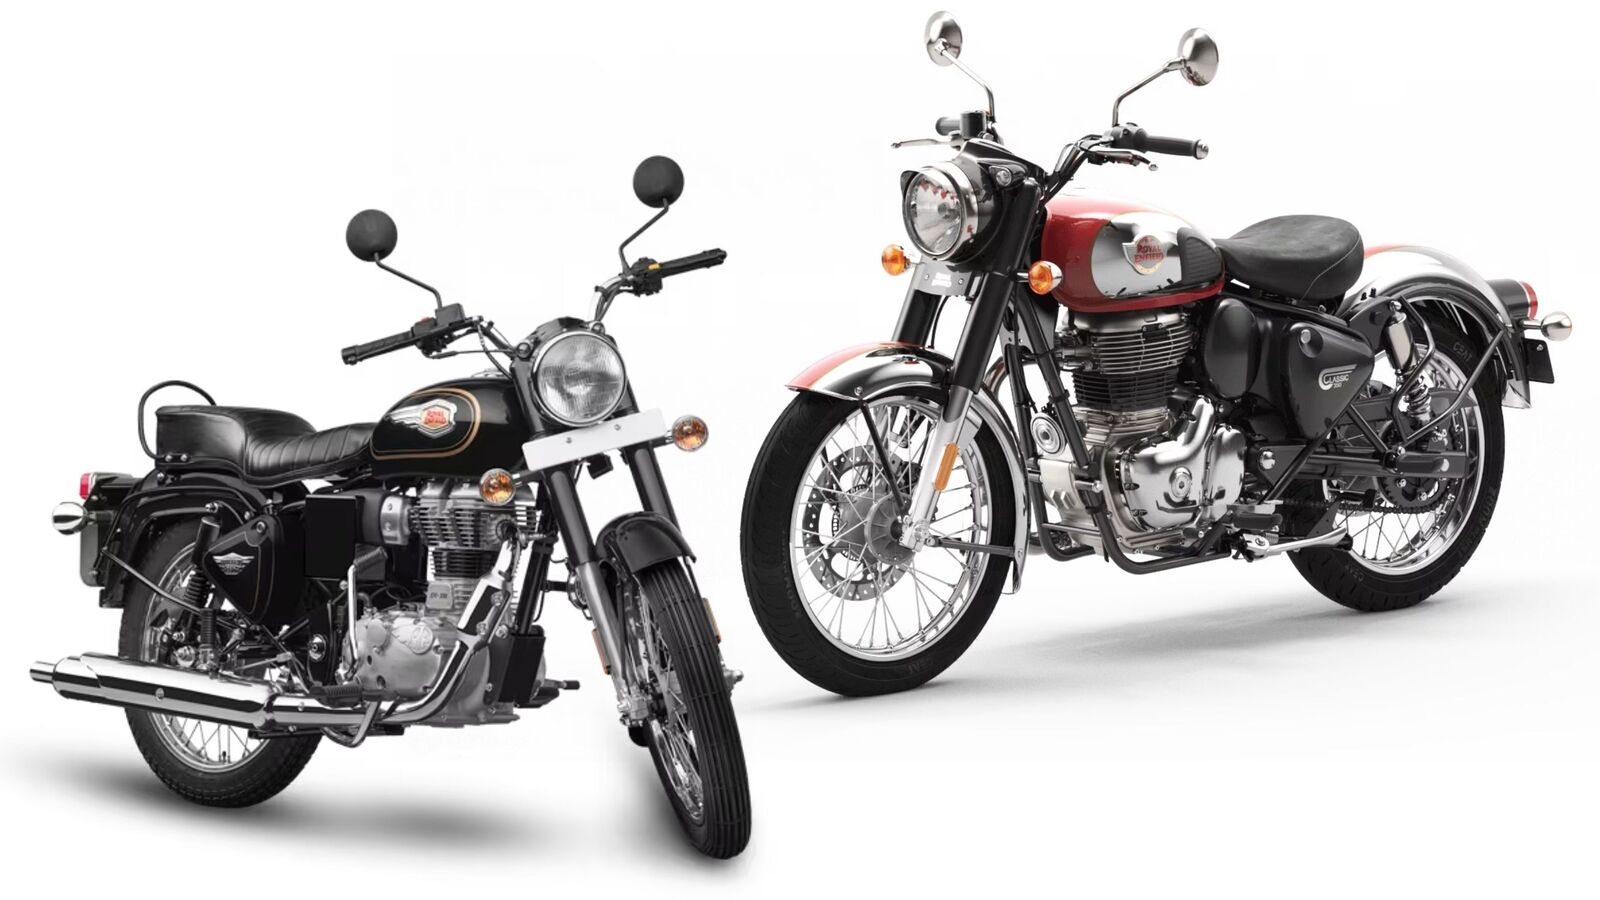 royal-enfield-bullet-350-vs-classic-350-should-you-spend-the-extra